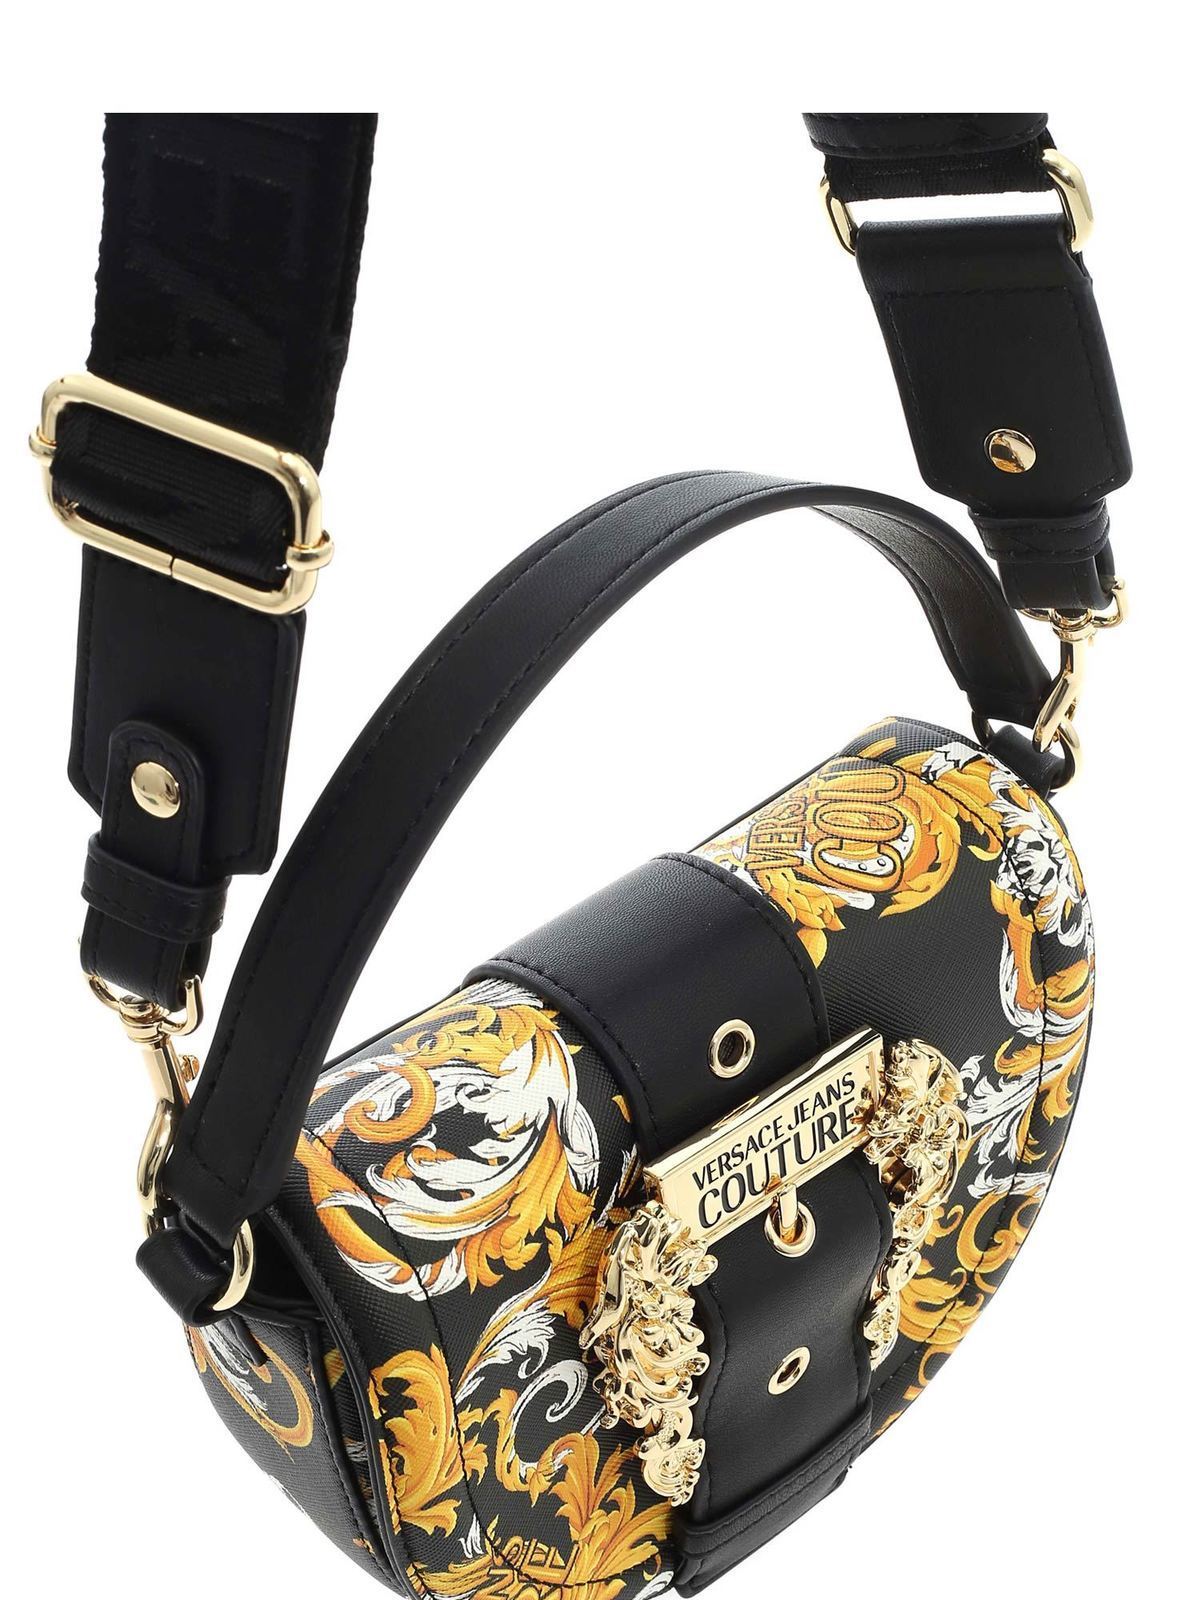 VERSACE JEANS COUTURE ショルダーバッグ ブラック ロゴ